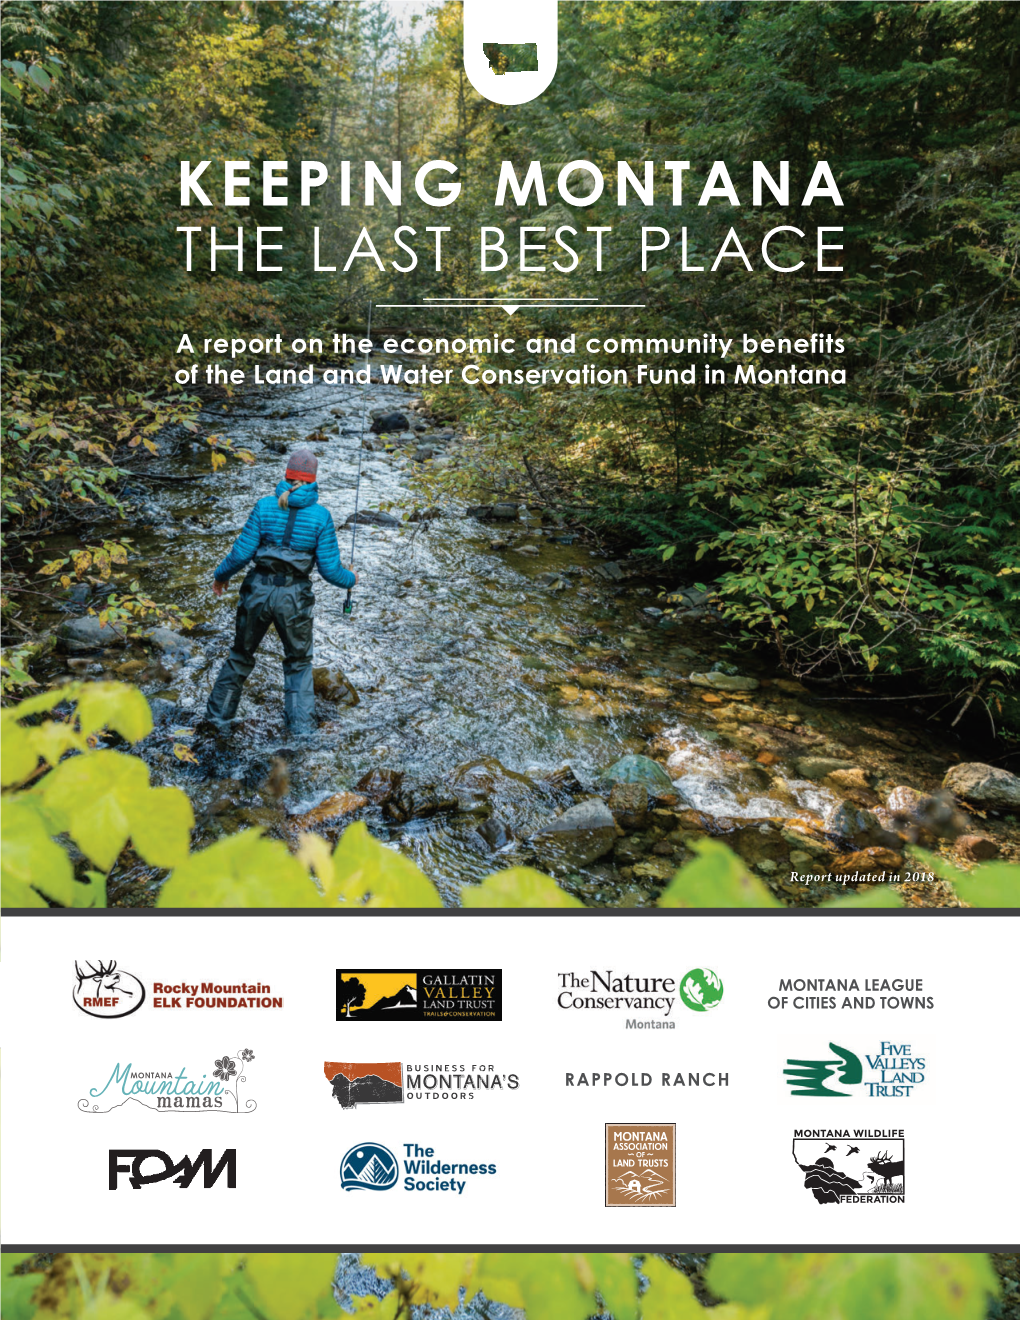 A Report on the Economic and Community Benefits of the Land and Water Conservation Fund in Montana